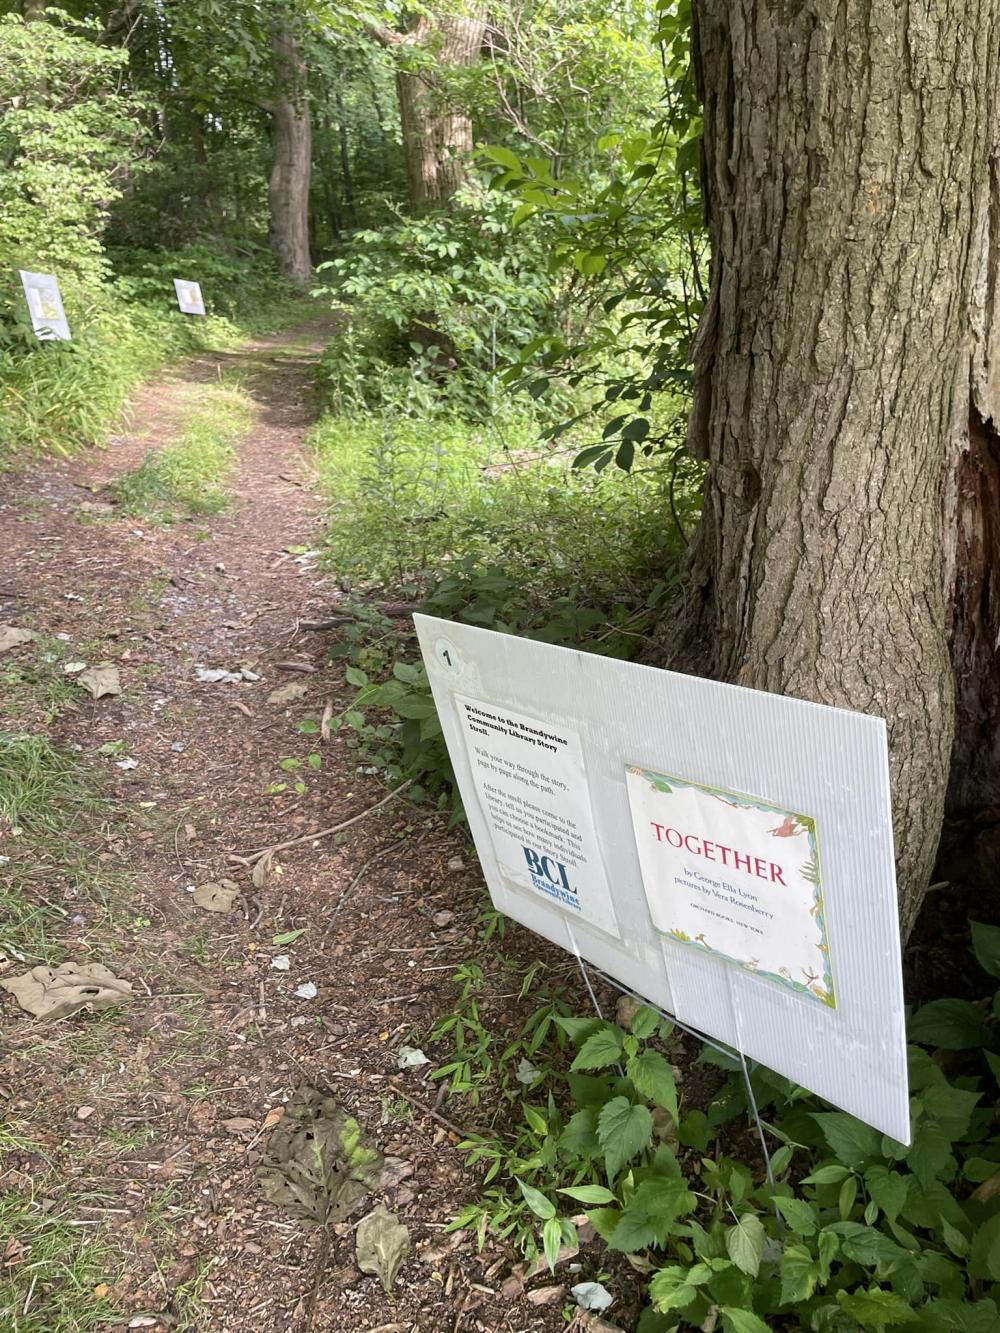 yard signs with story pages line a shaded, wooded trail